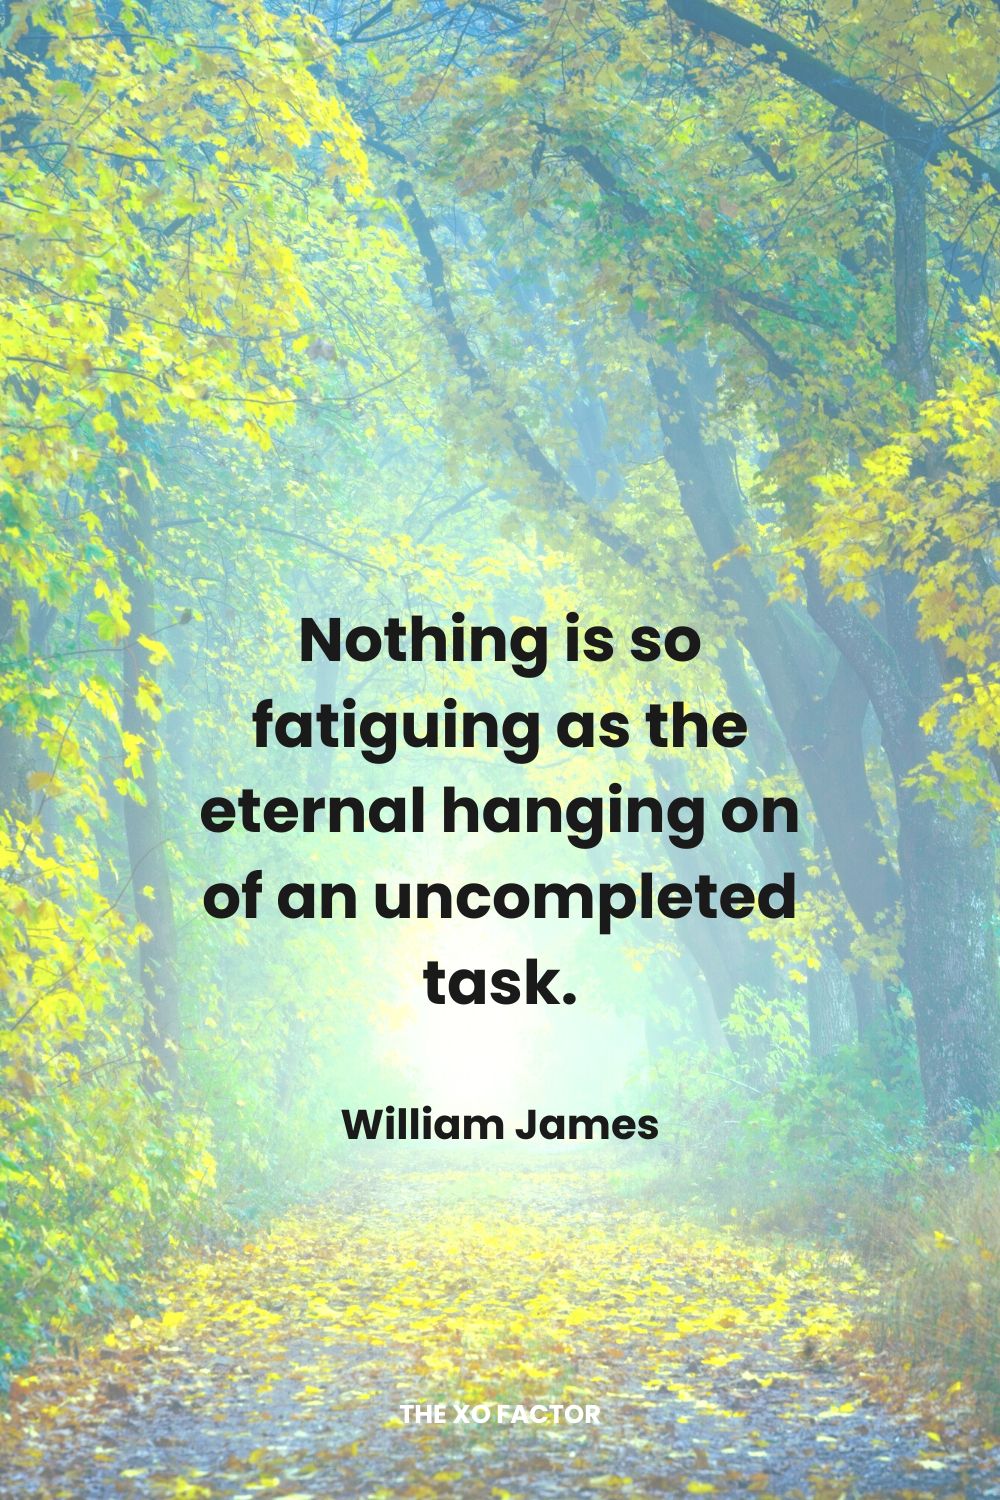 Nothing is so fatiguing as the eternal hanging on of an uncompleted task. William James